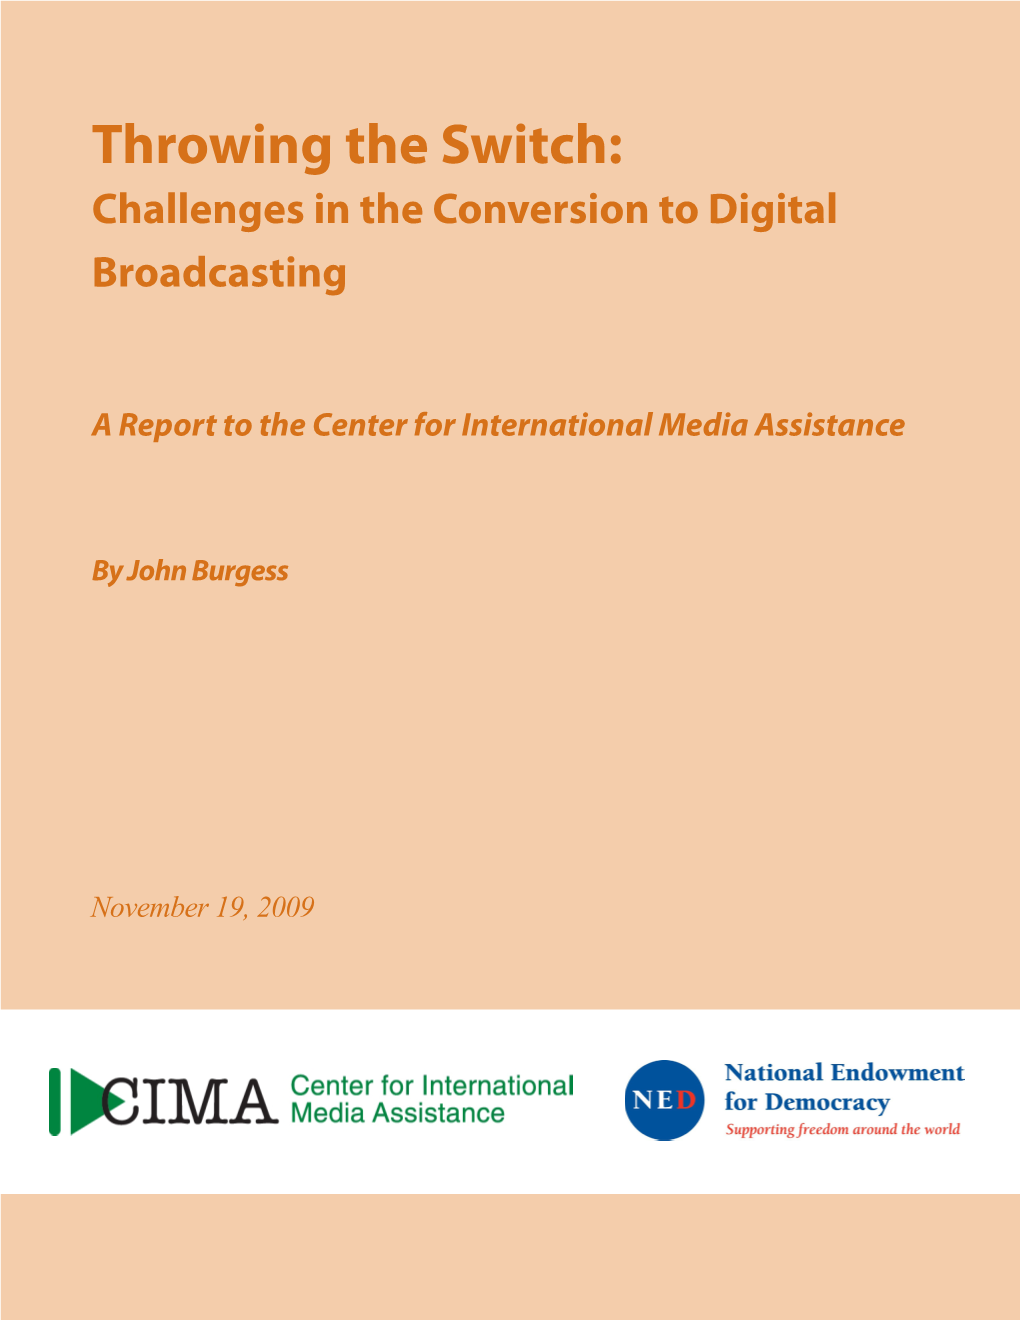 Throwing the Switch: Challenges in the Conversion to Digital Broadcasting